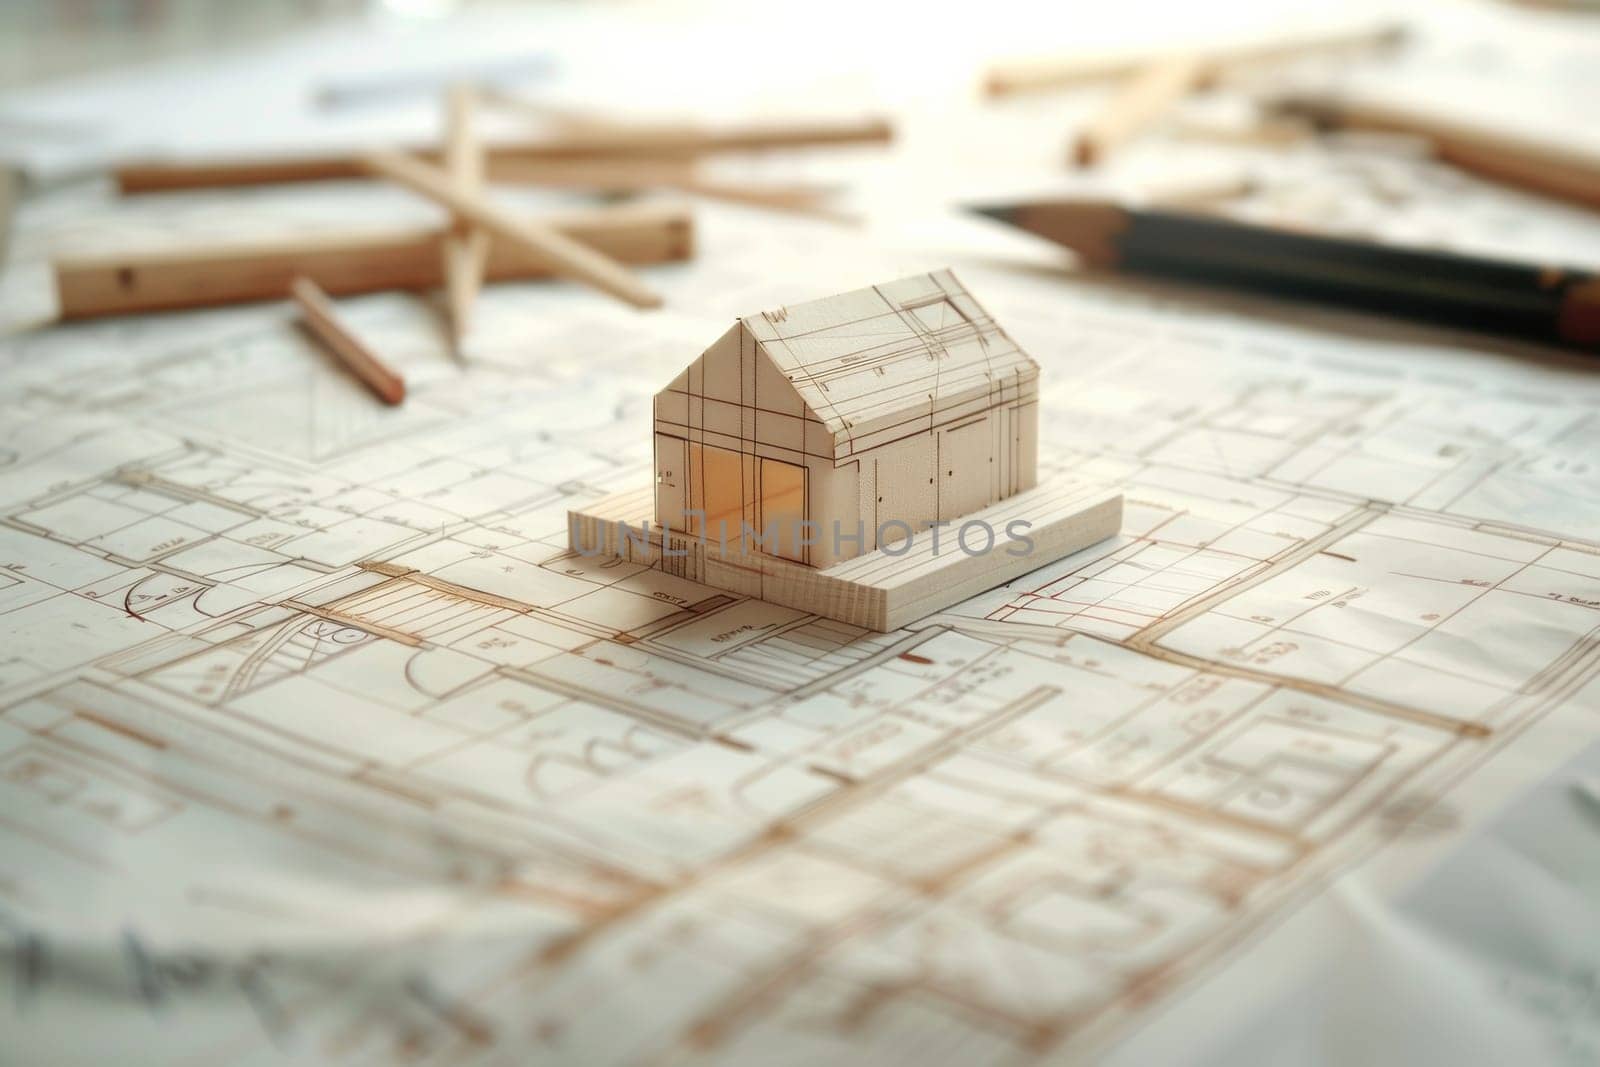 A beautifully crafted wooden model of a house is placed atop a table, illustrating a project renovation sketch with plans and design ideas for an architectural bureau or construction company advertisement.